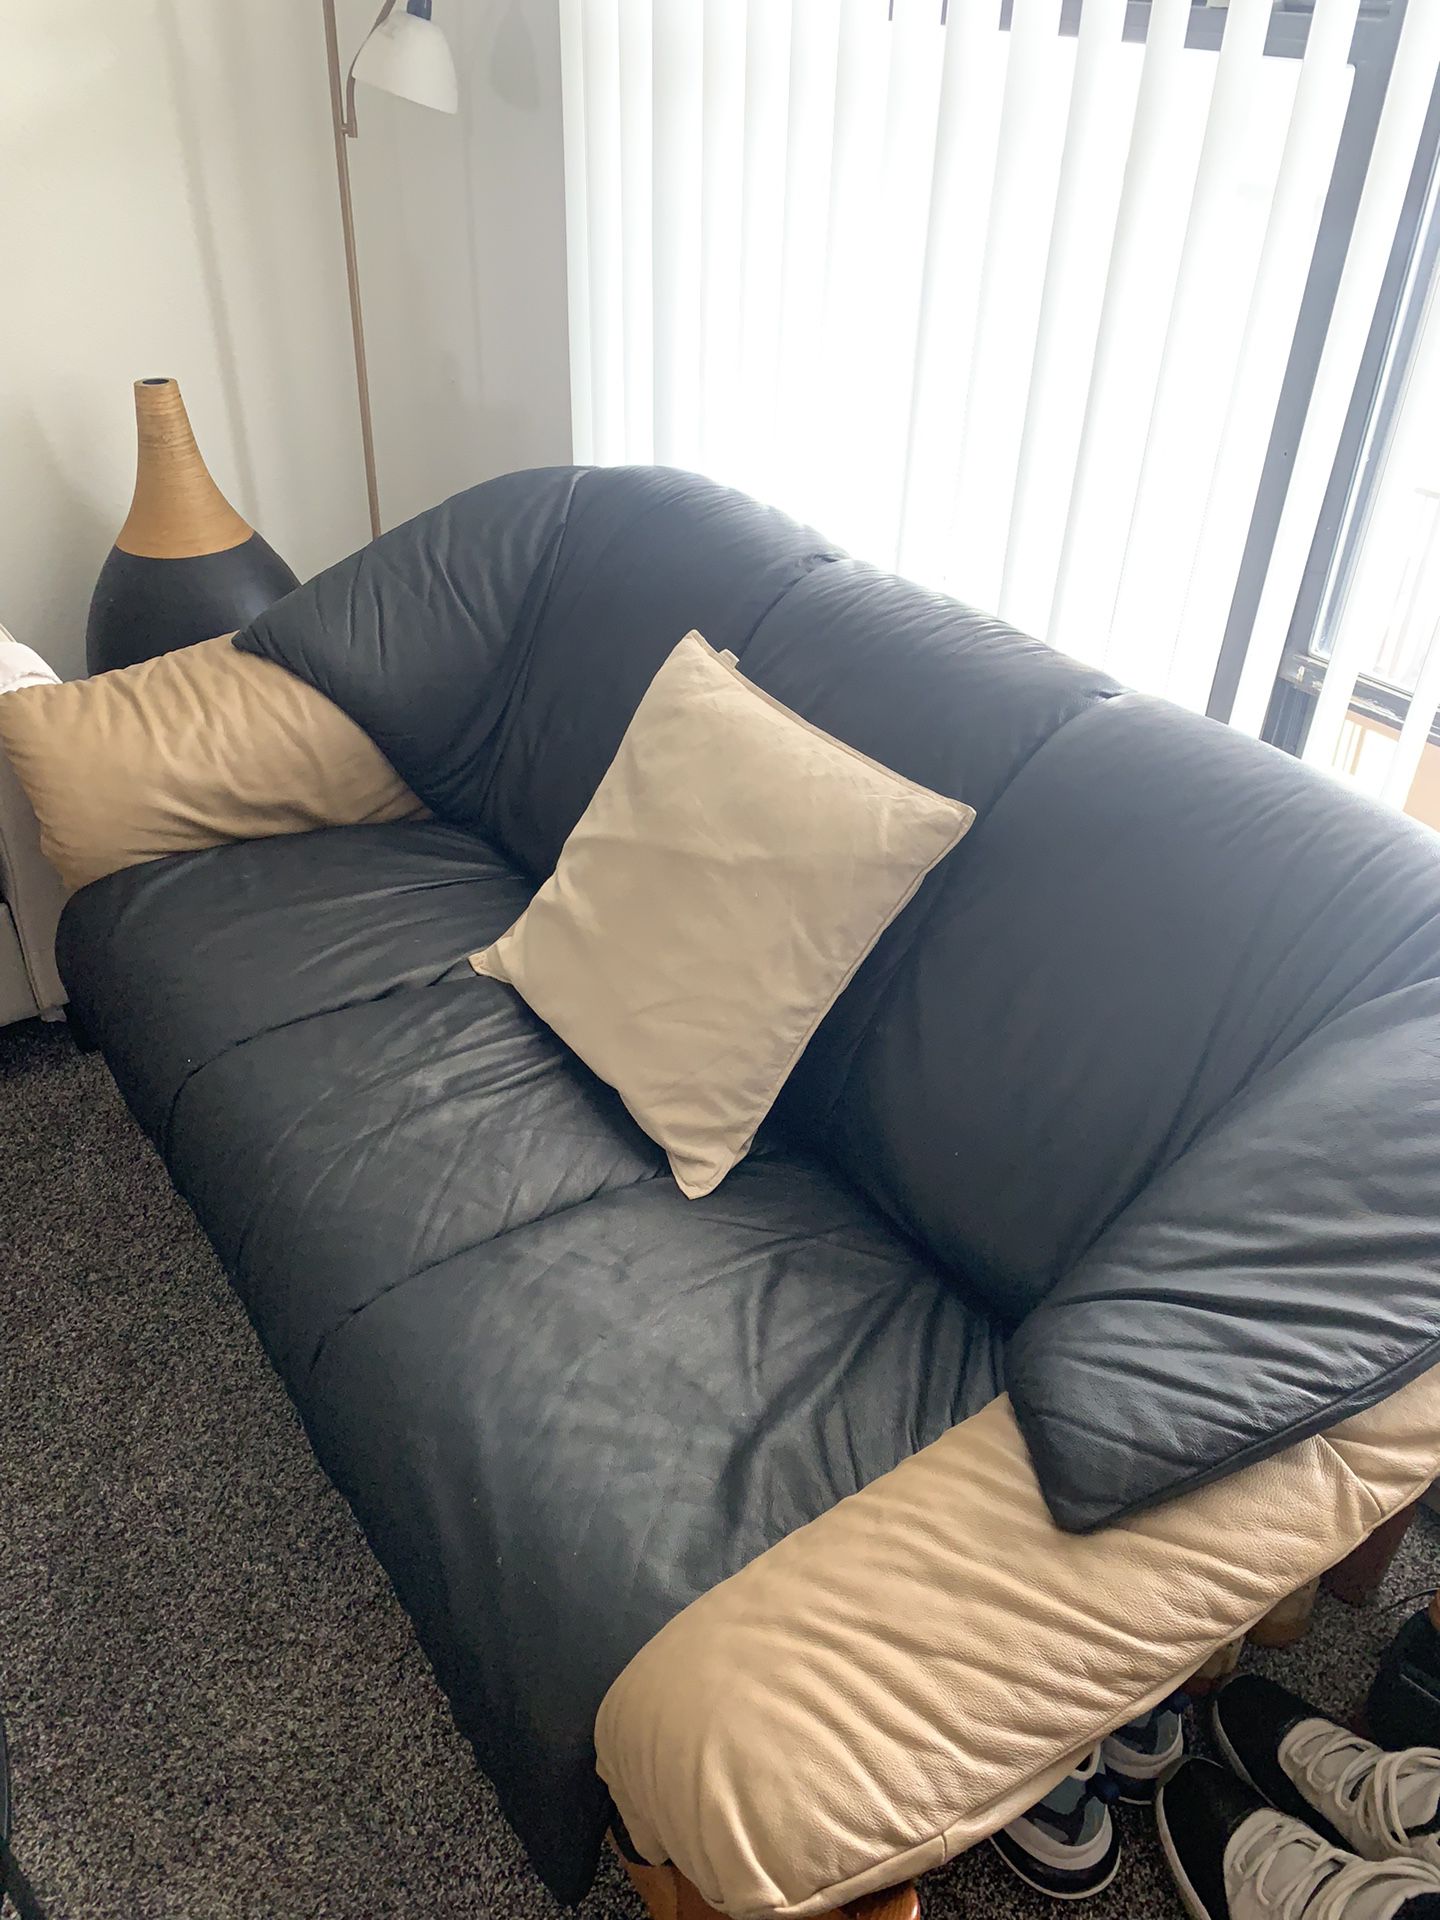 3 Seat Leather Couch